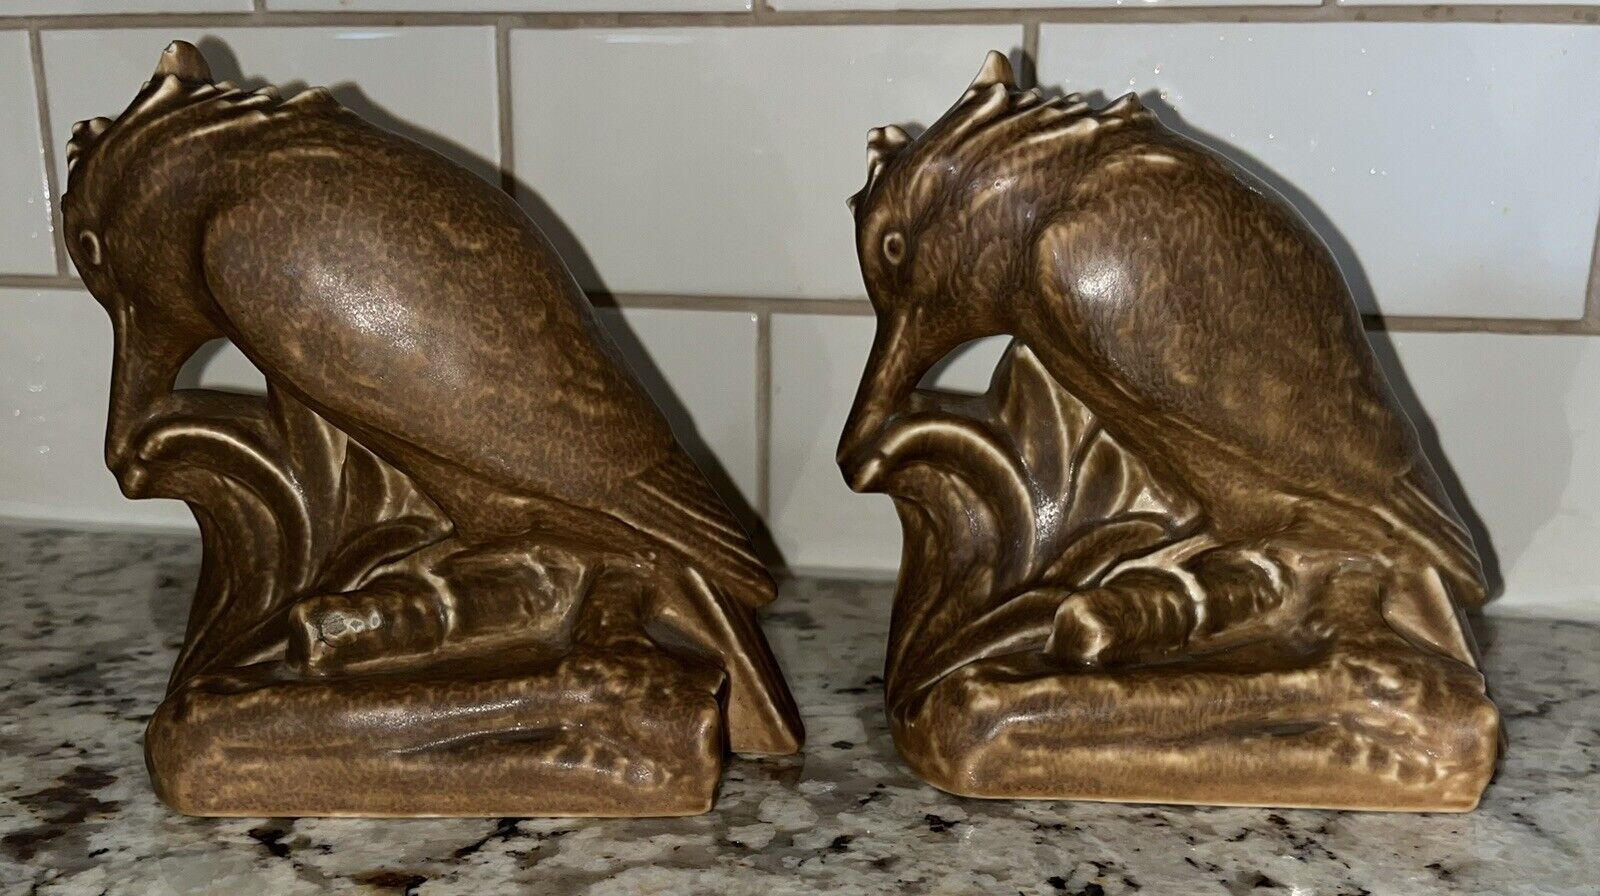 Pair of Antique Figural Rookwood Pottery King Fisher Bookends by Wm. McDonald